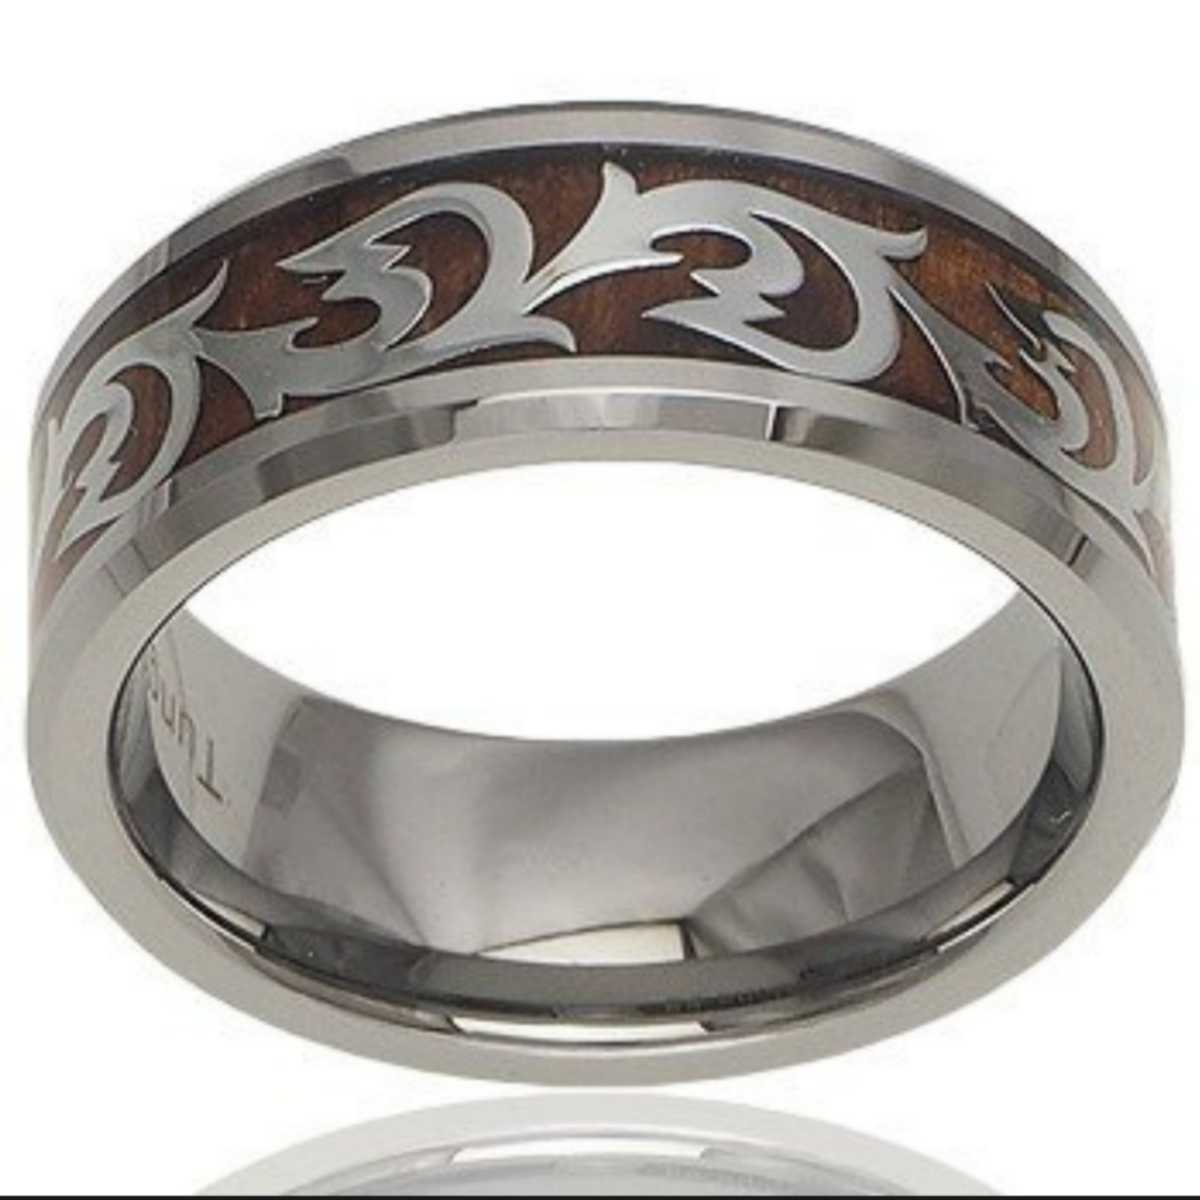  Hawaiian jewelry ring ring tang stain core wood wave stamp equipped men's ring 